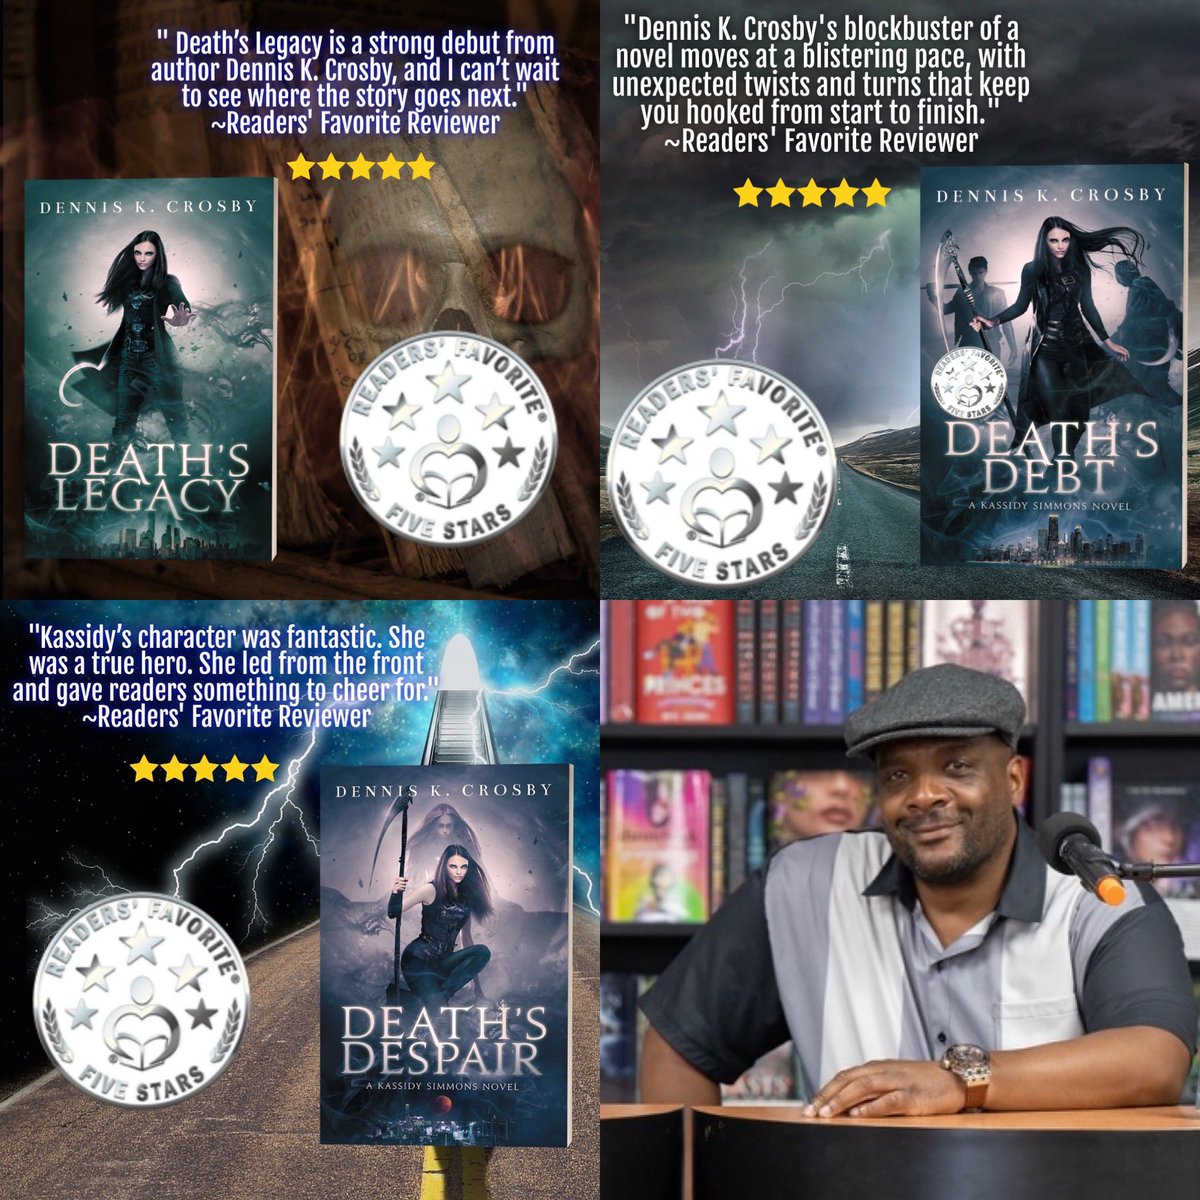 Jessica Jones meets Clash of the Titans, with a dash of Buffy the Vampire Slayer, and a few sprinkles of Supernatural. Grab up the first three novels of the award-winning Kassidy Simmons Series. Go to denniskcrosby.com/books for purchase links. #urbanfantasy #darkfantasy